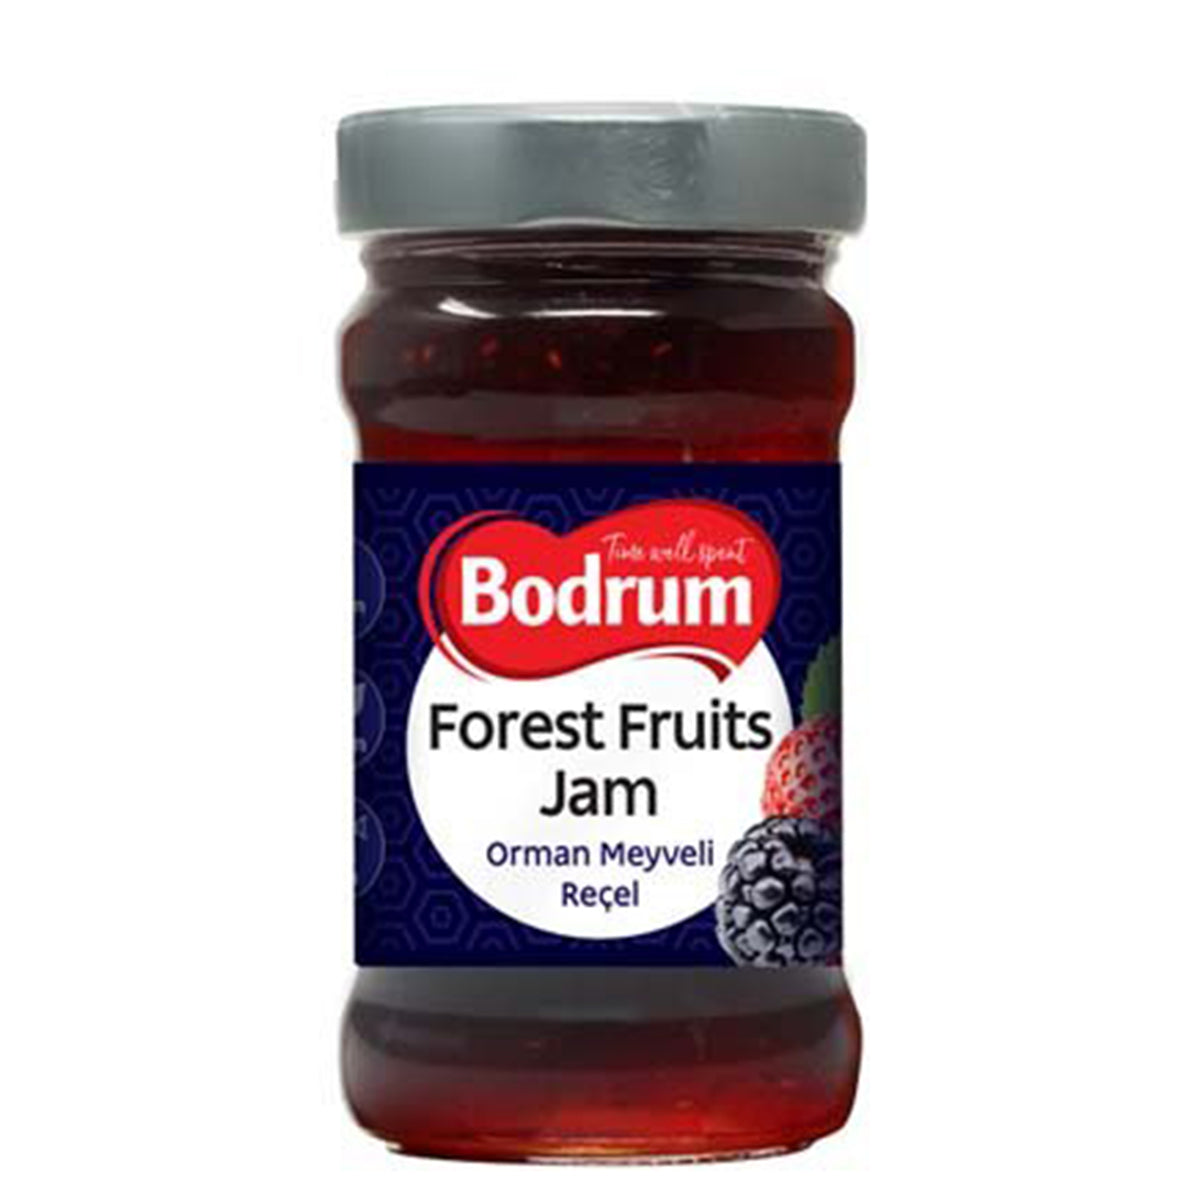 Bodrum - Forest Fruits Jam - 380g, made by the brand Bodrum.